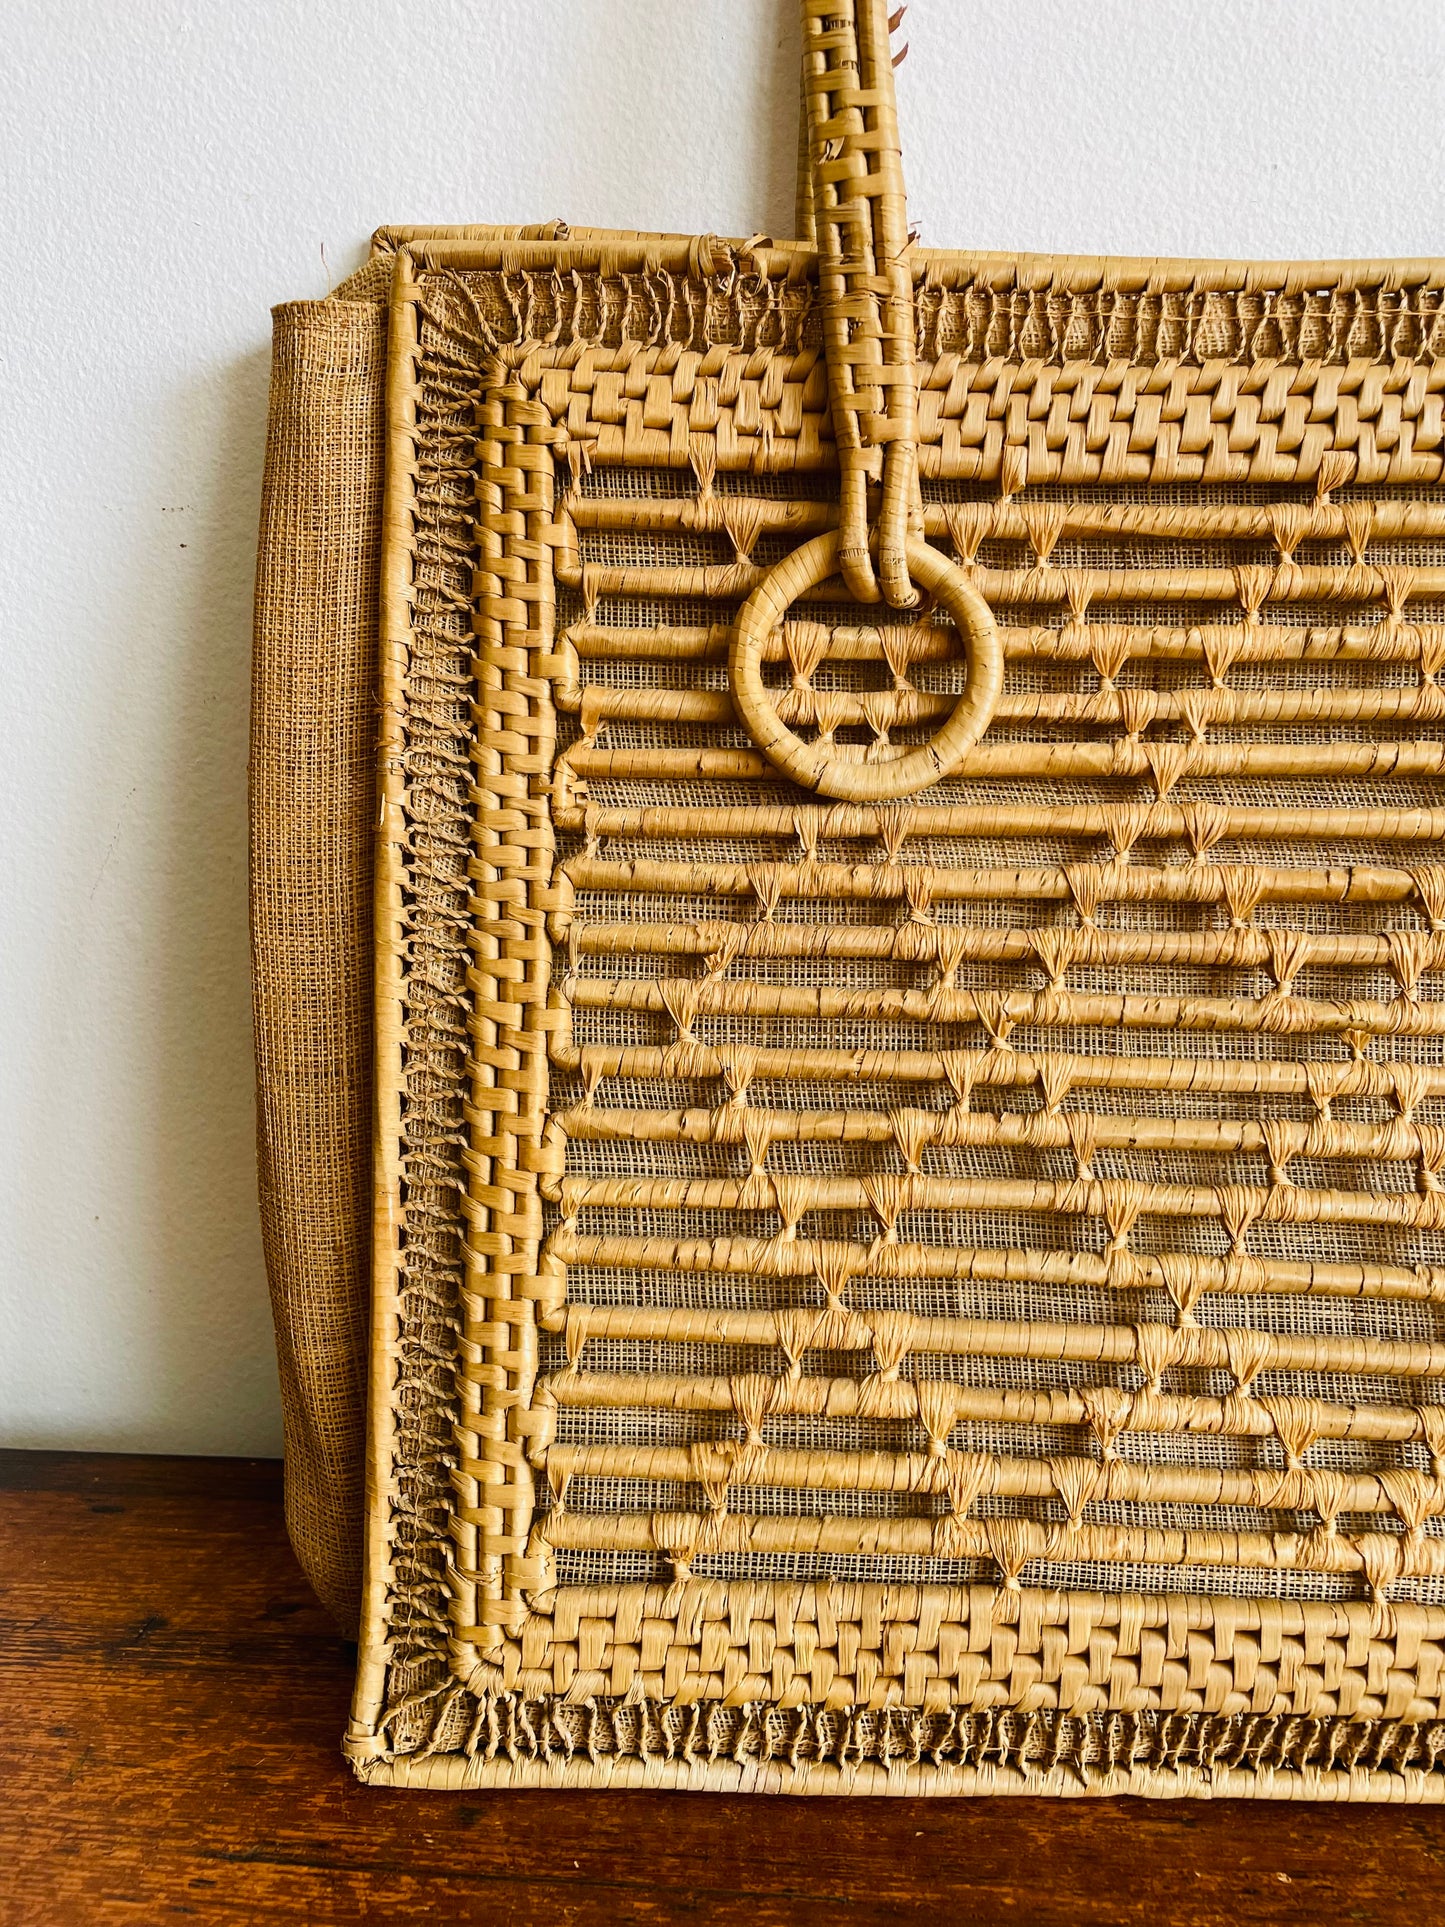 Woven Straw Rattan with Mesh Sides Purse